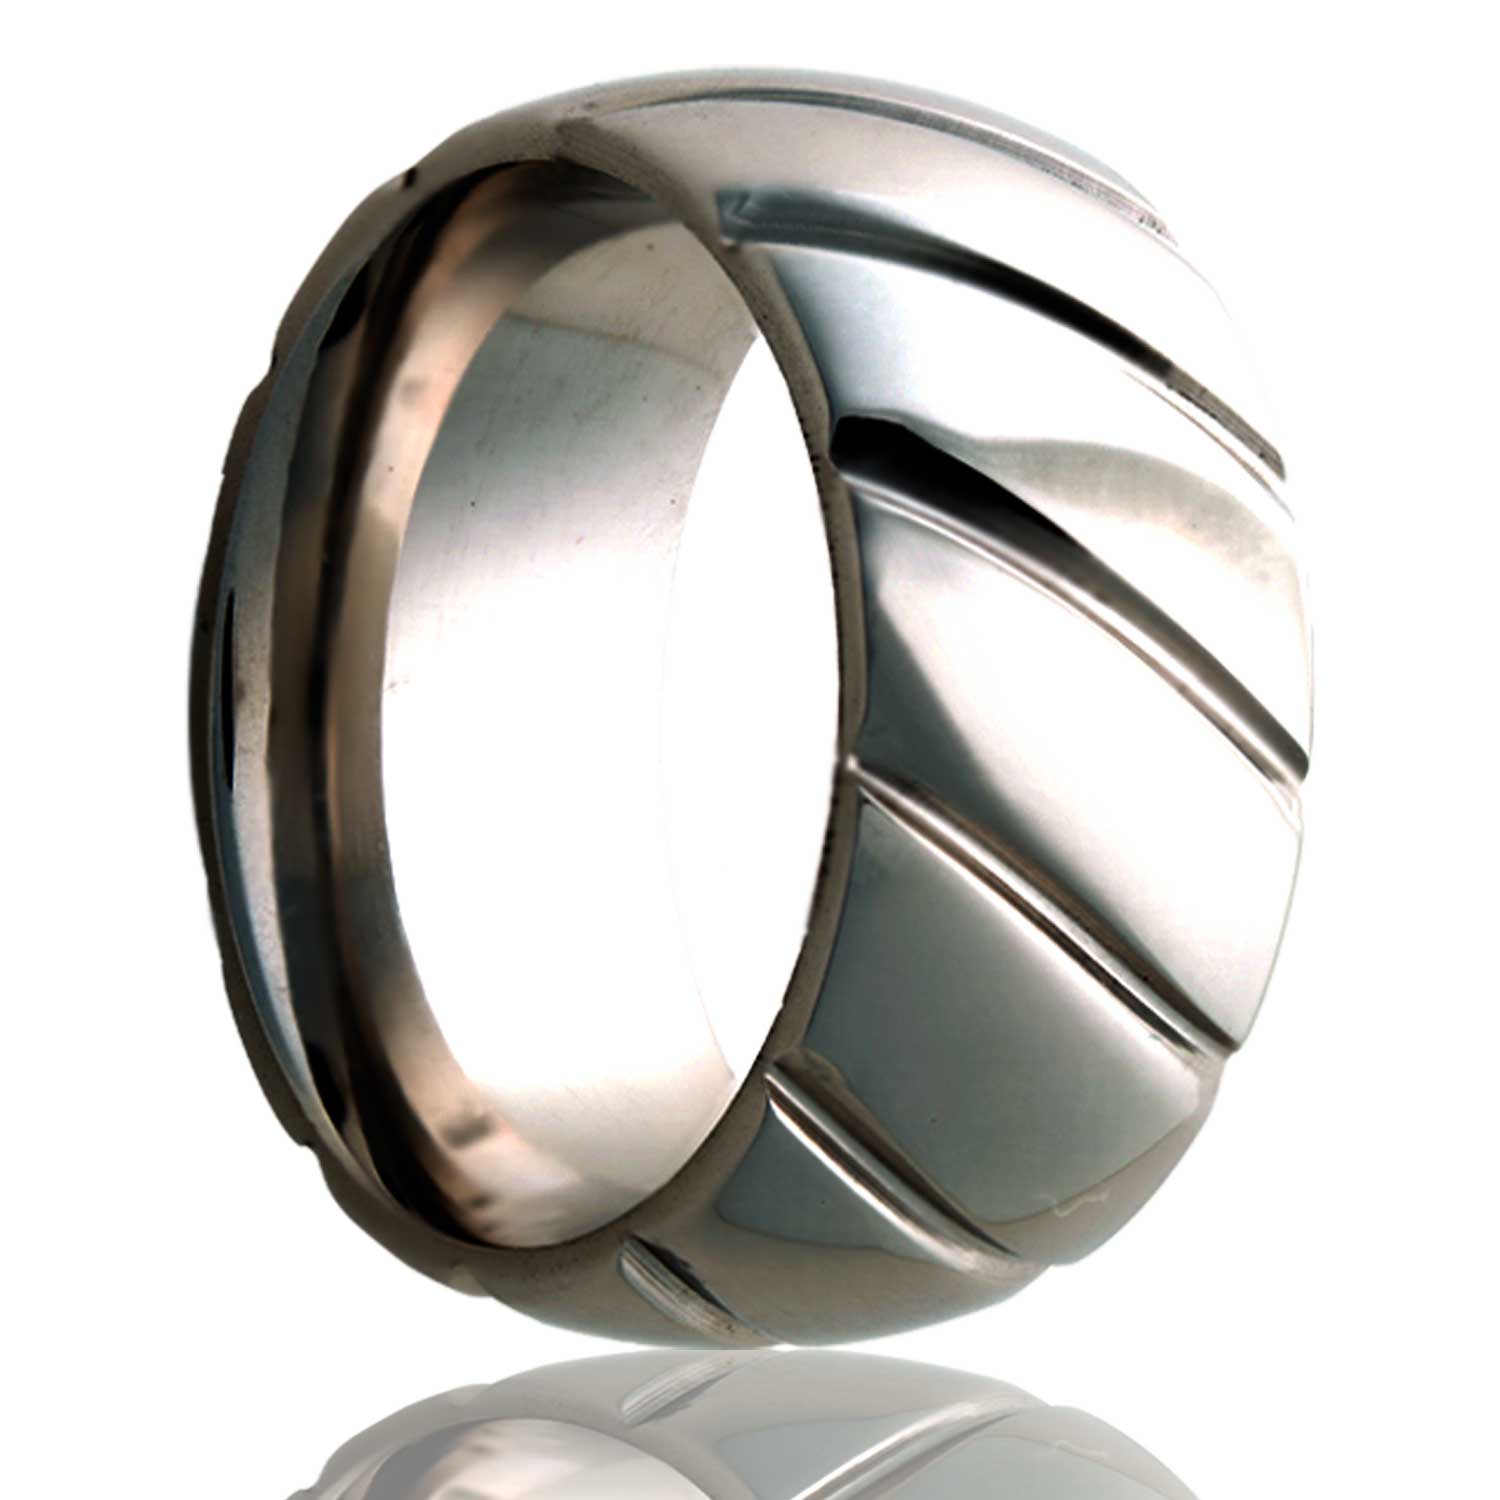 A diagonal grooves domed titanium wedding band displayed on a neutral white background.